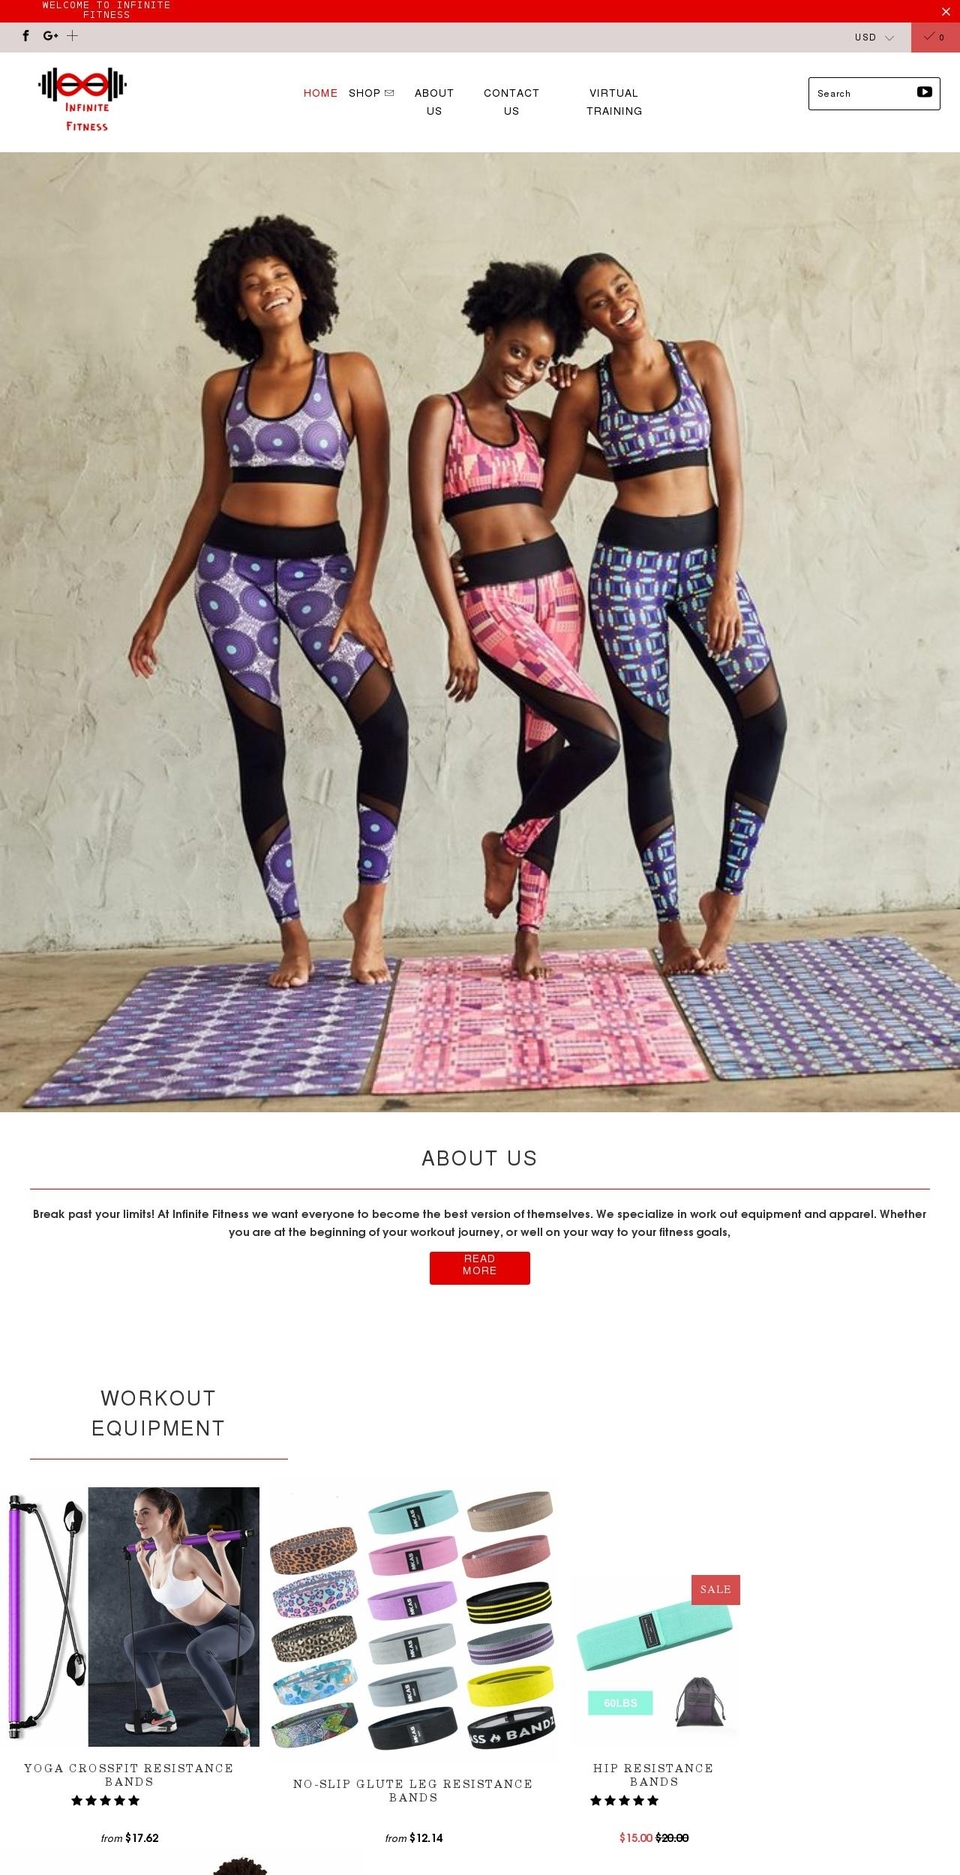 infinit Shopify theme site example infinitefitness.org